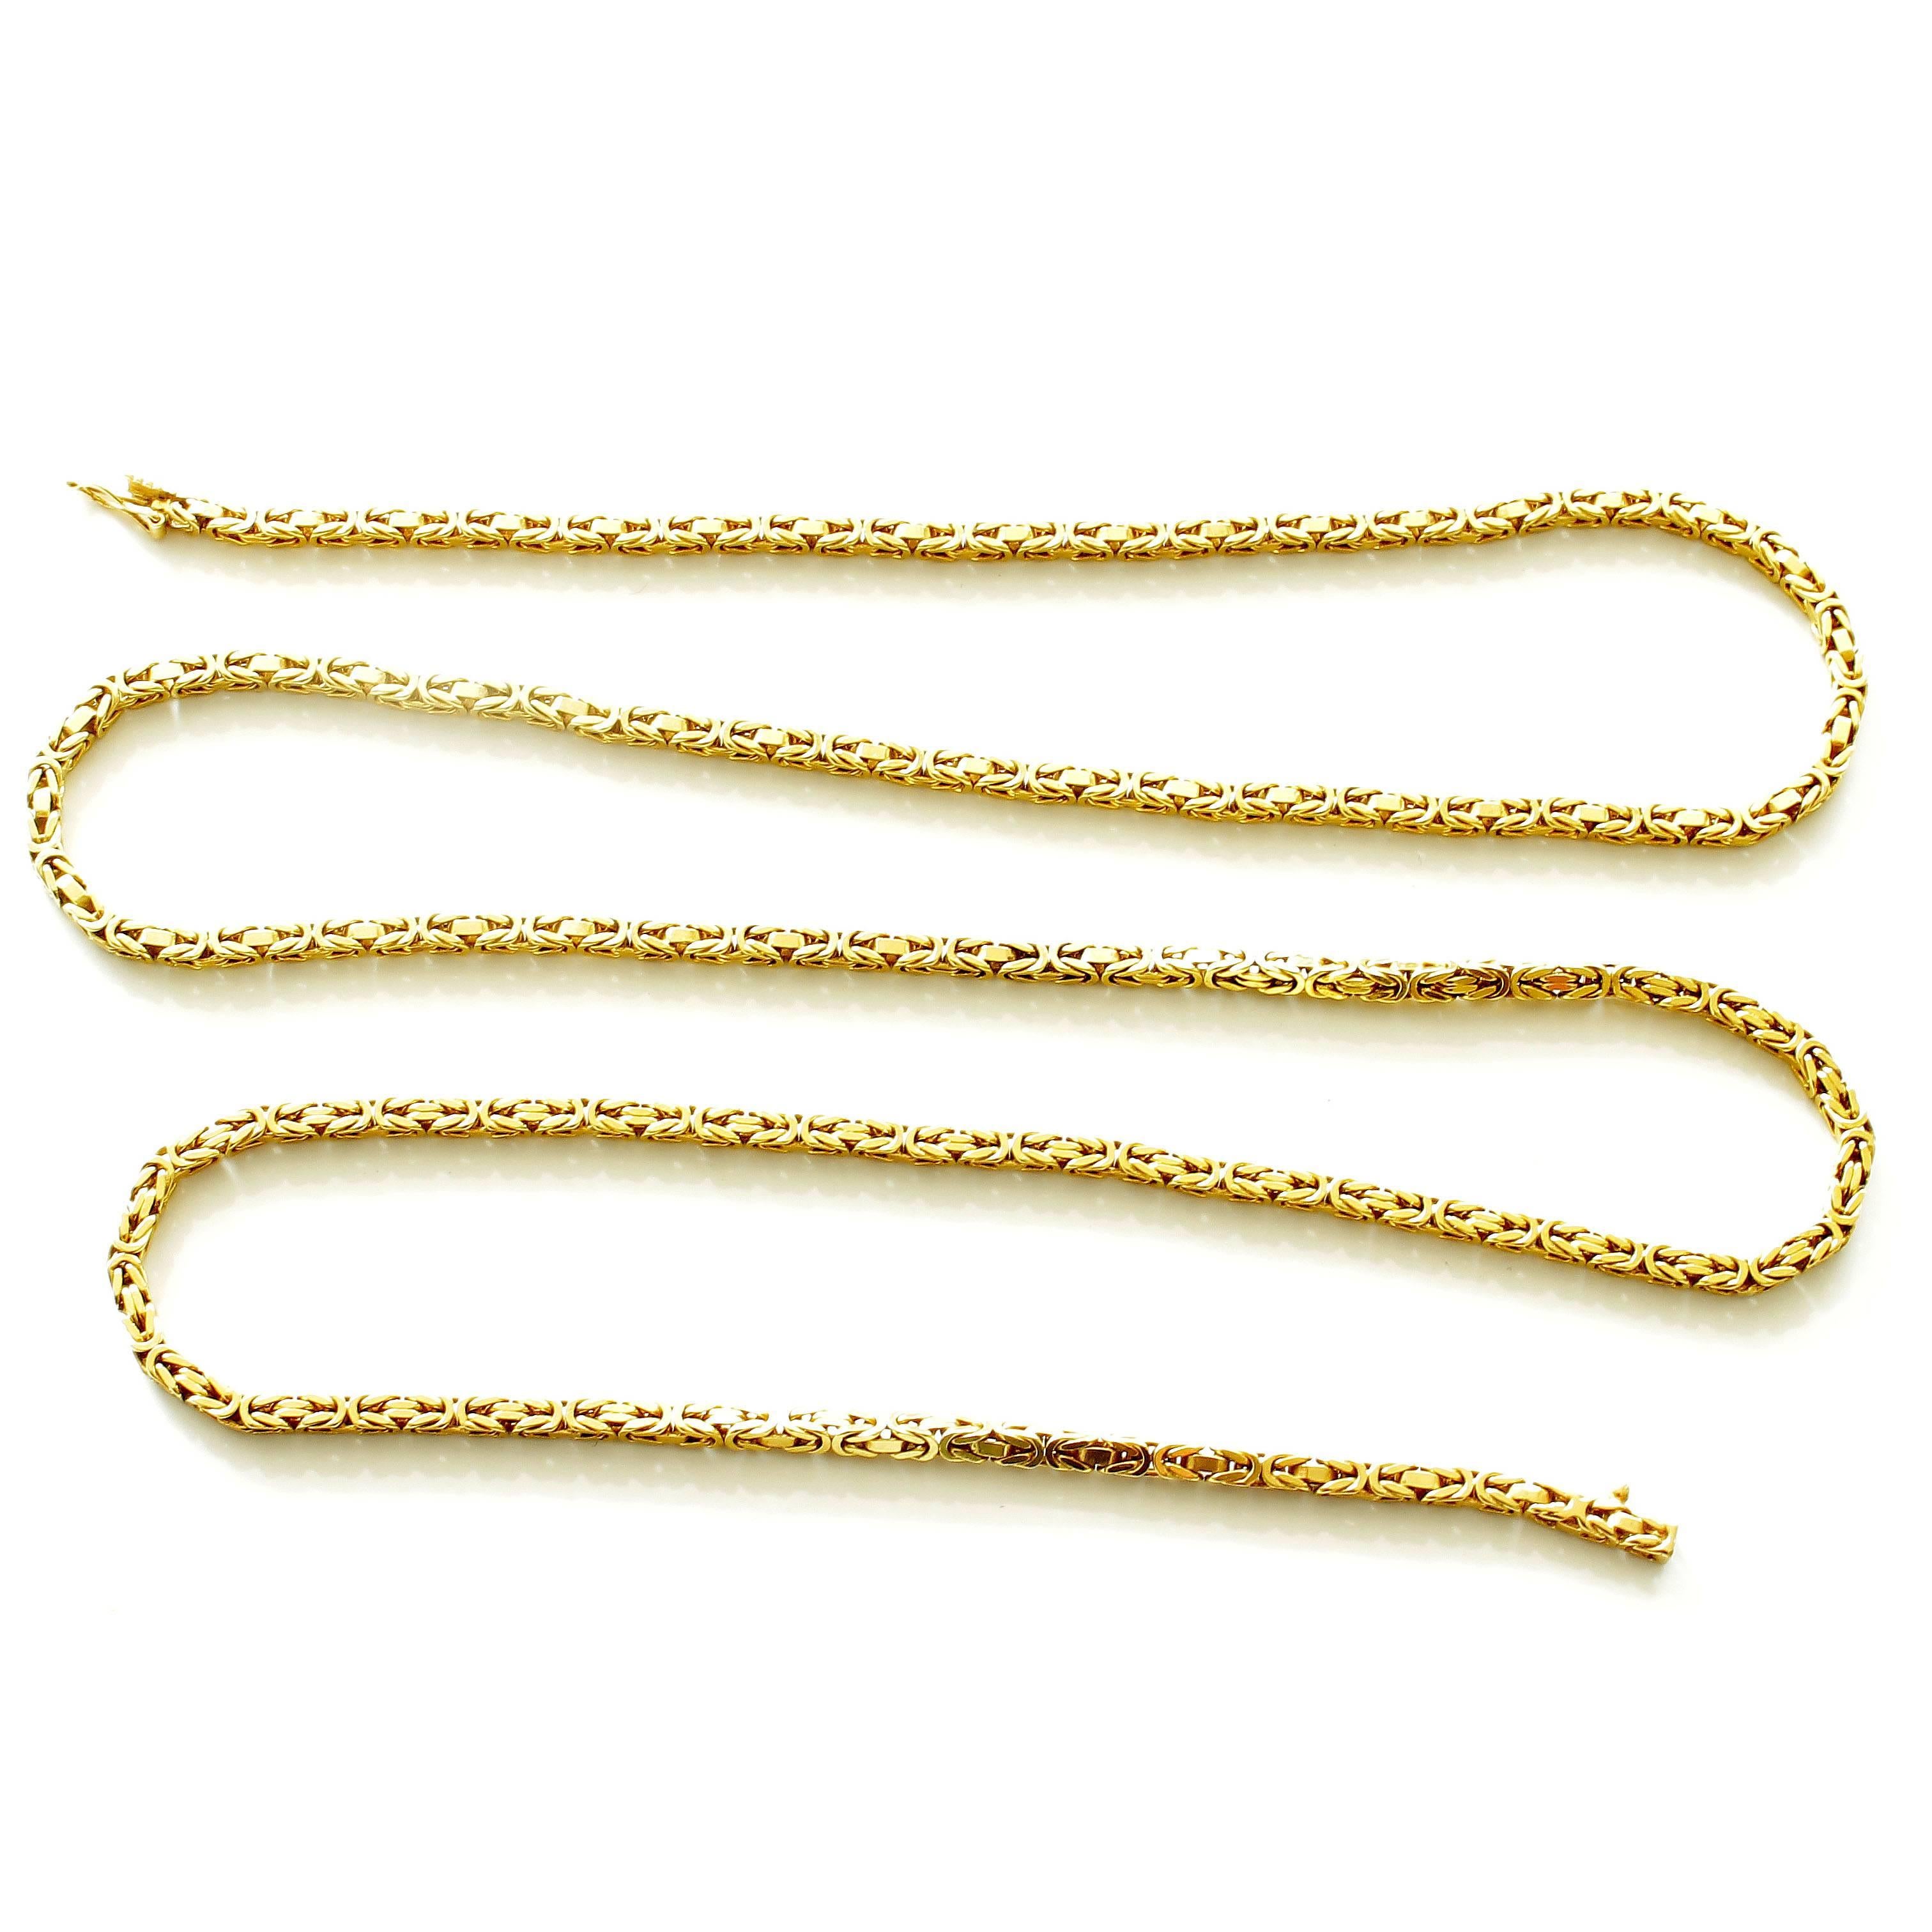 A timeless design to put the final touches on any outfit. Fashioned in braided glistening 18k gold. Stamped with French hallmarks. 31 inches long. Weighs 60.7 grams.